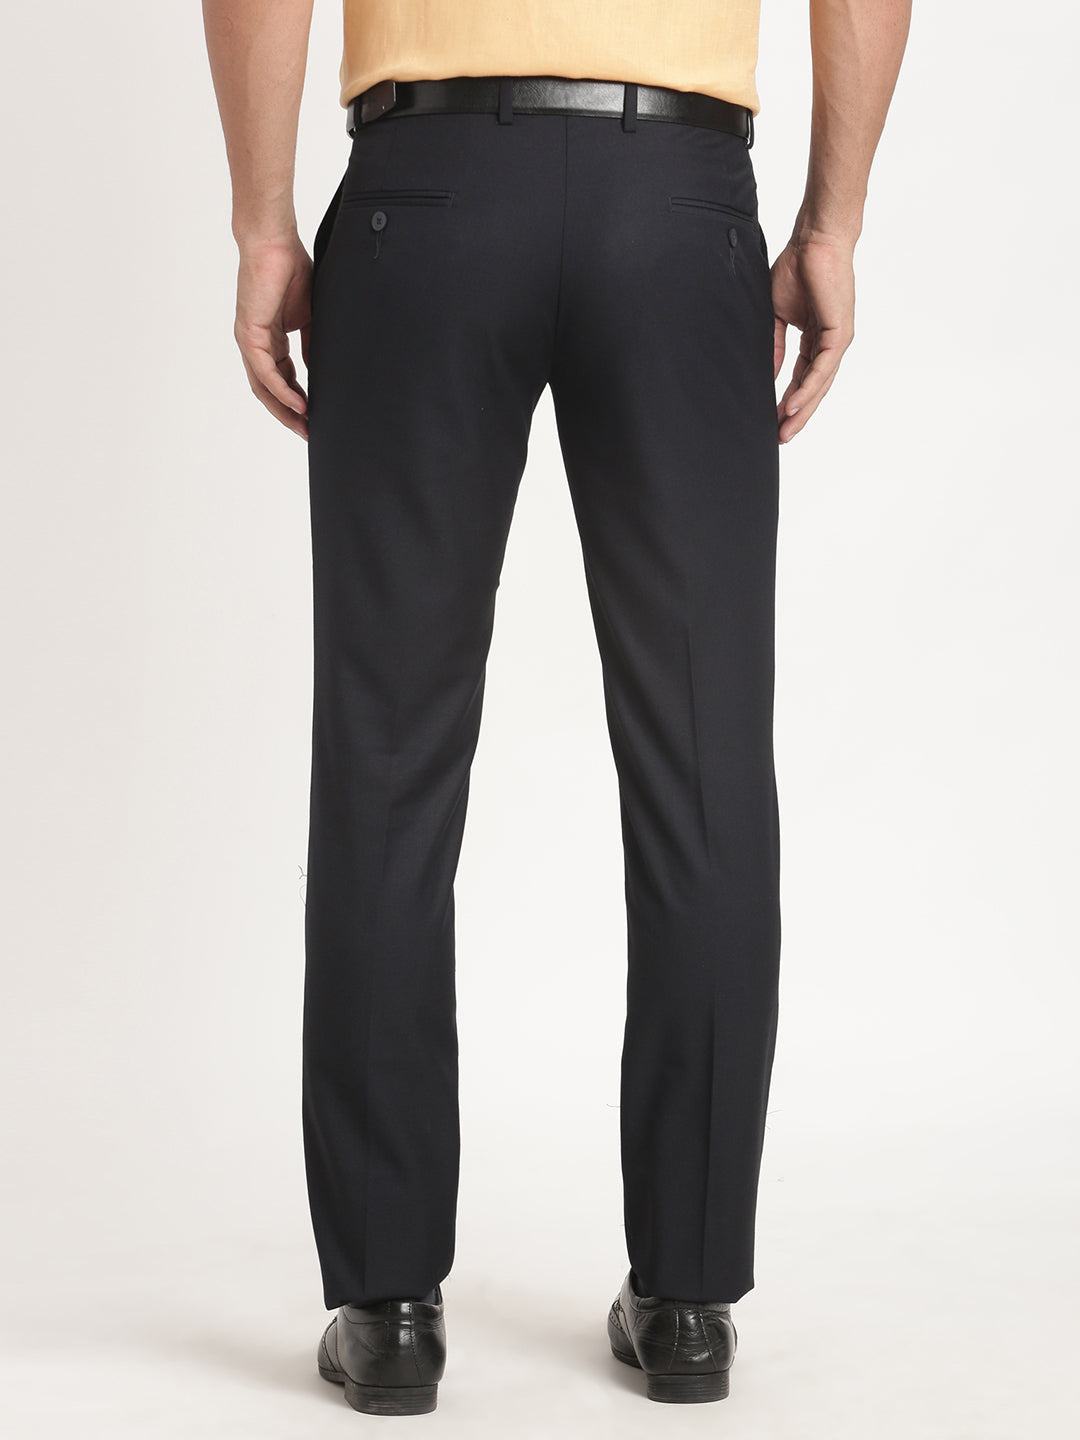 Terry Rayon Black Plain Slim Fit Flat Front Formal Trouser